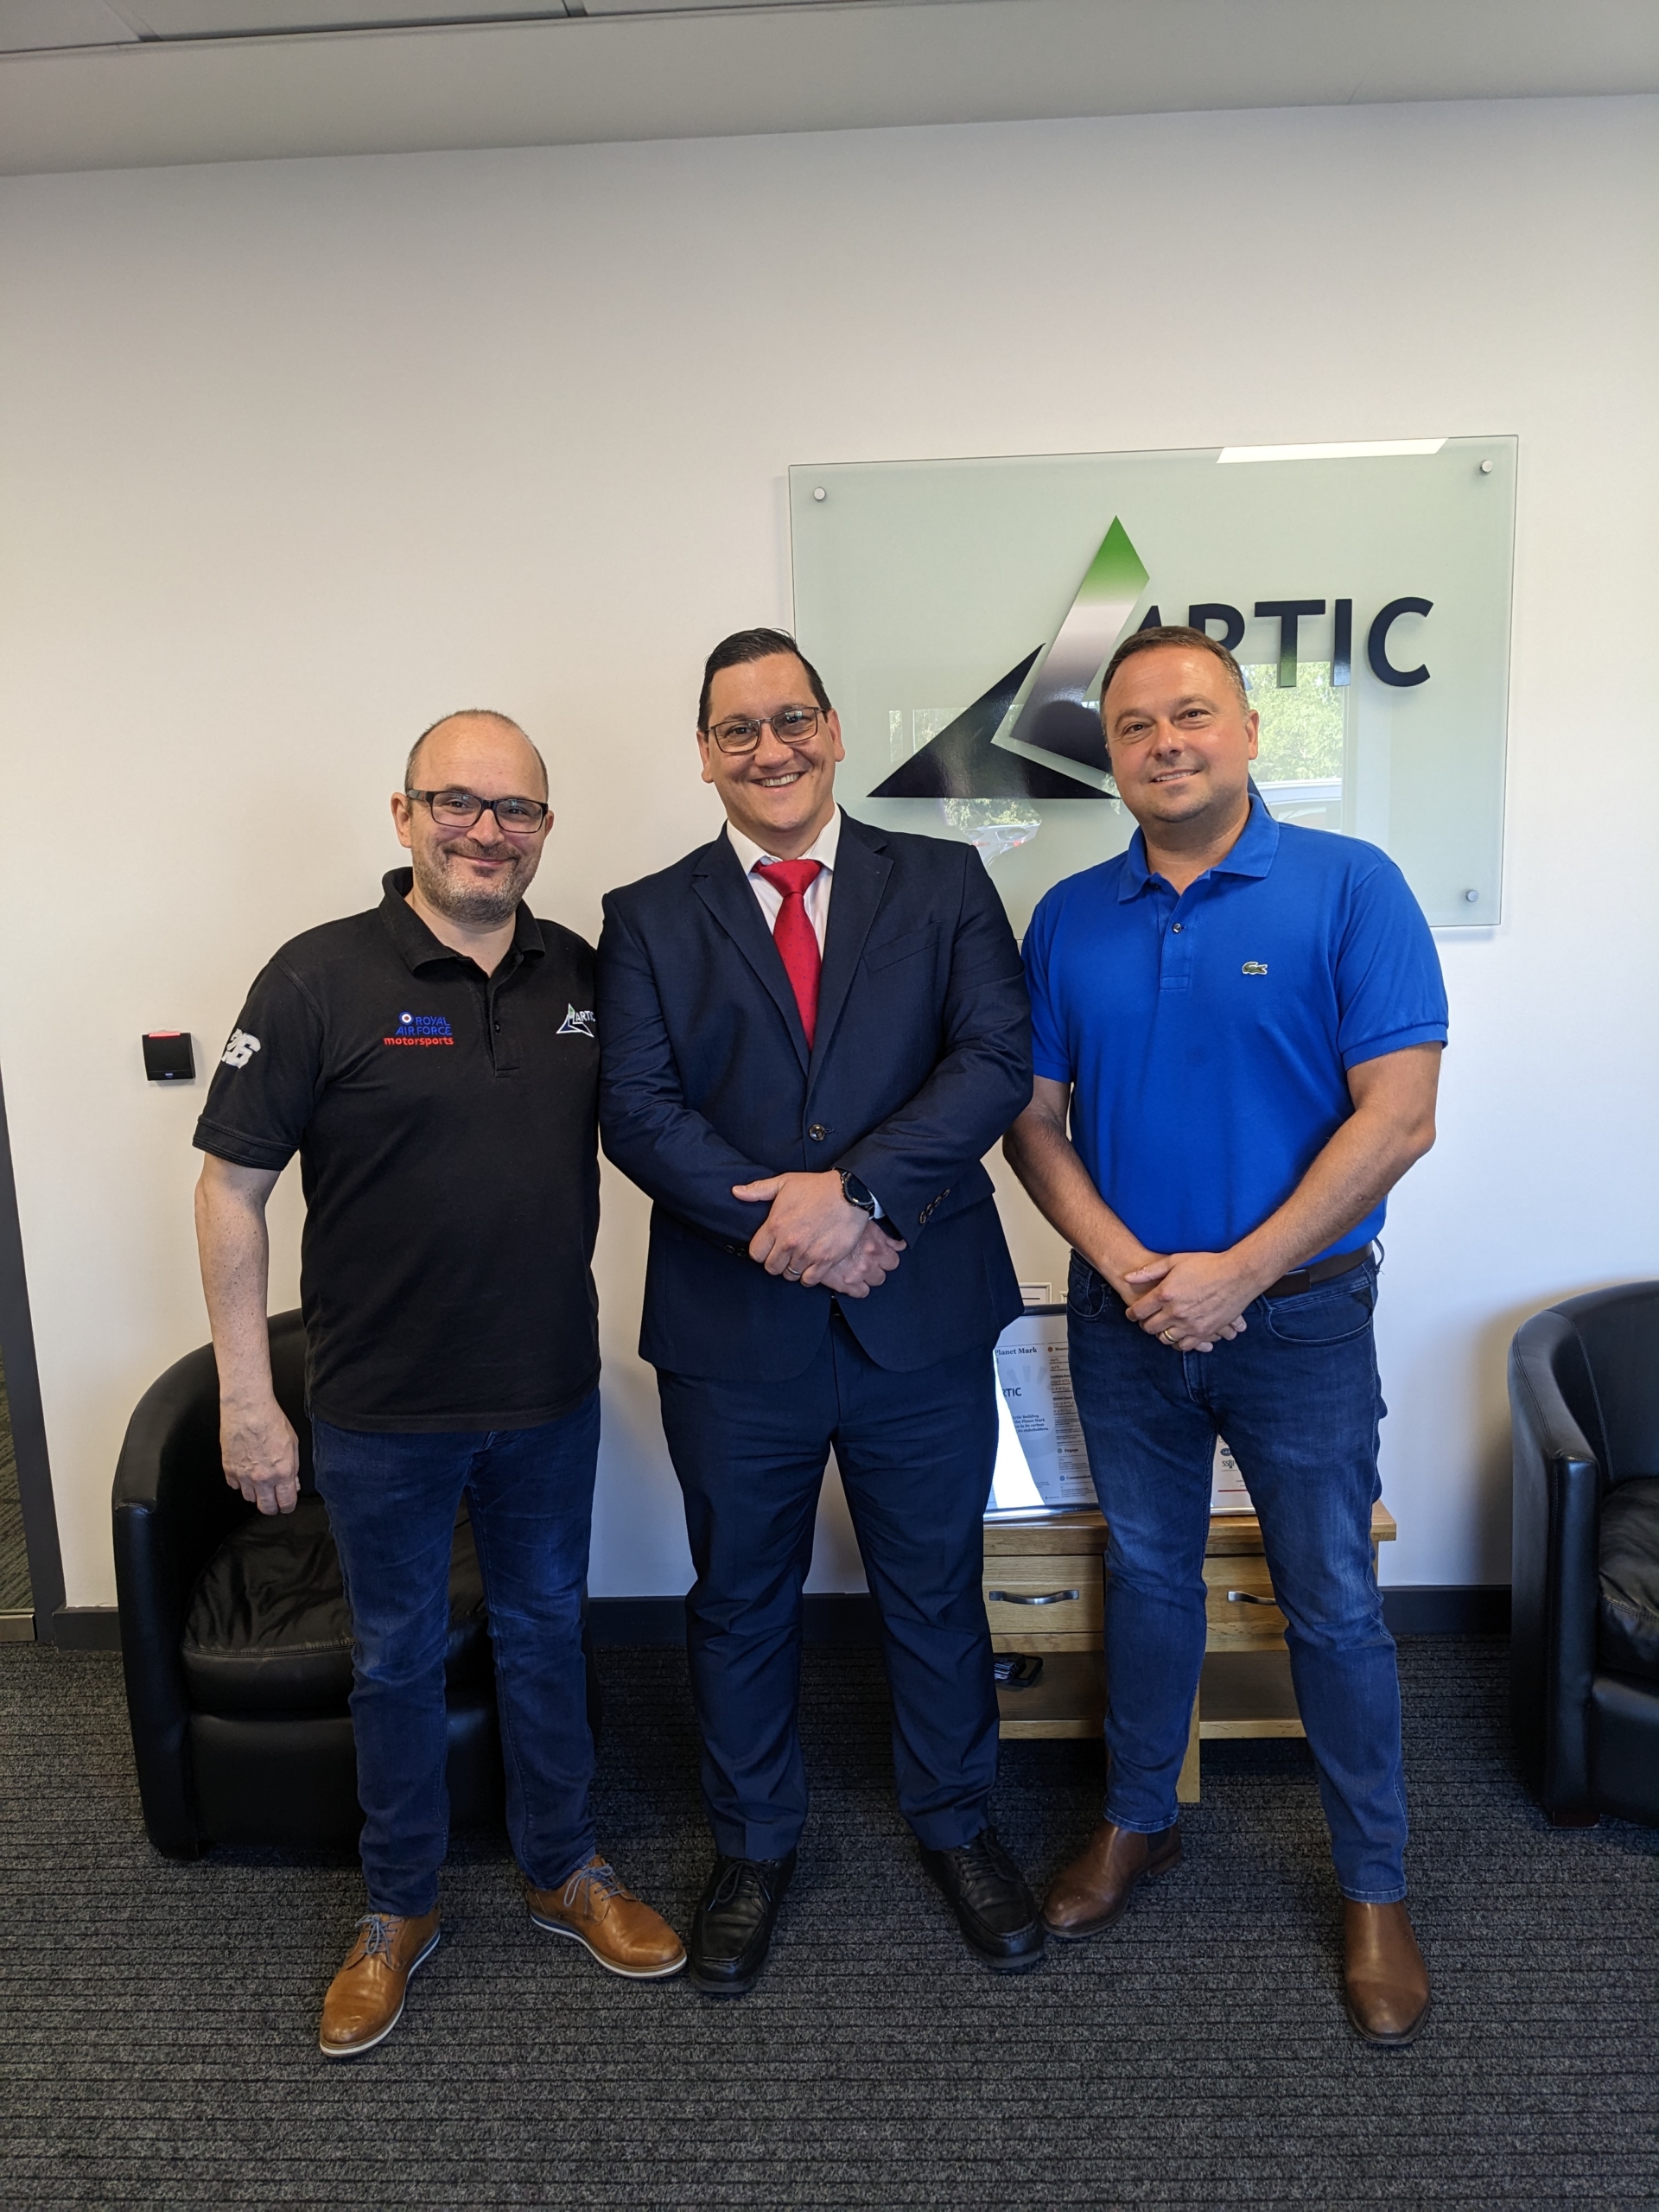 Keith Hewitt with Artic's MD's Colin and Paul